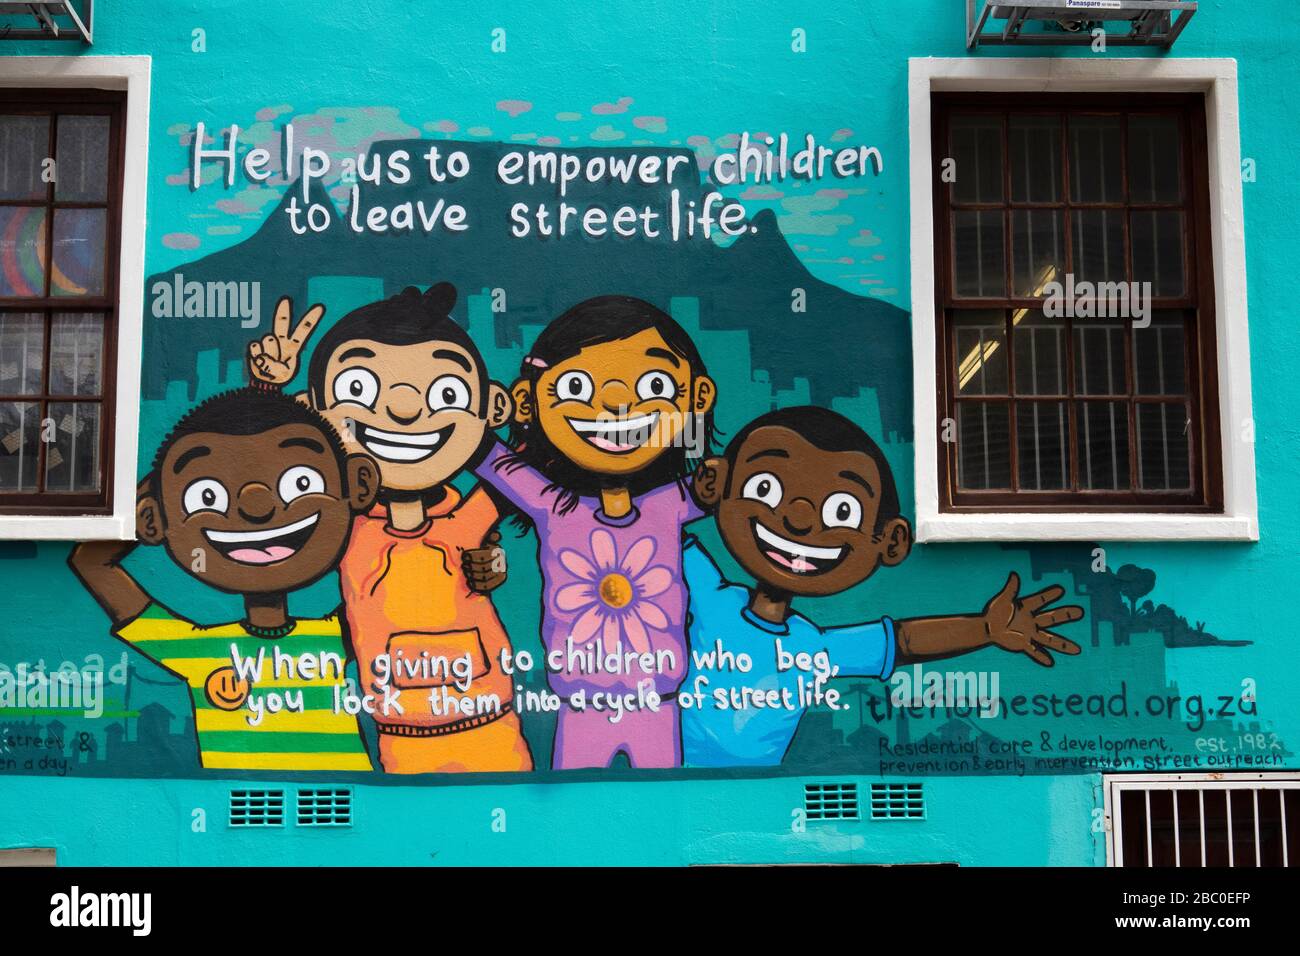 South Africa, Cape Town, The Homestead Organisation, do not give to begging street children mural Stock Photo